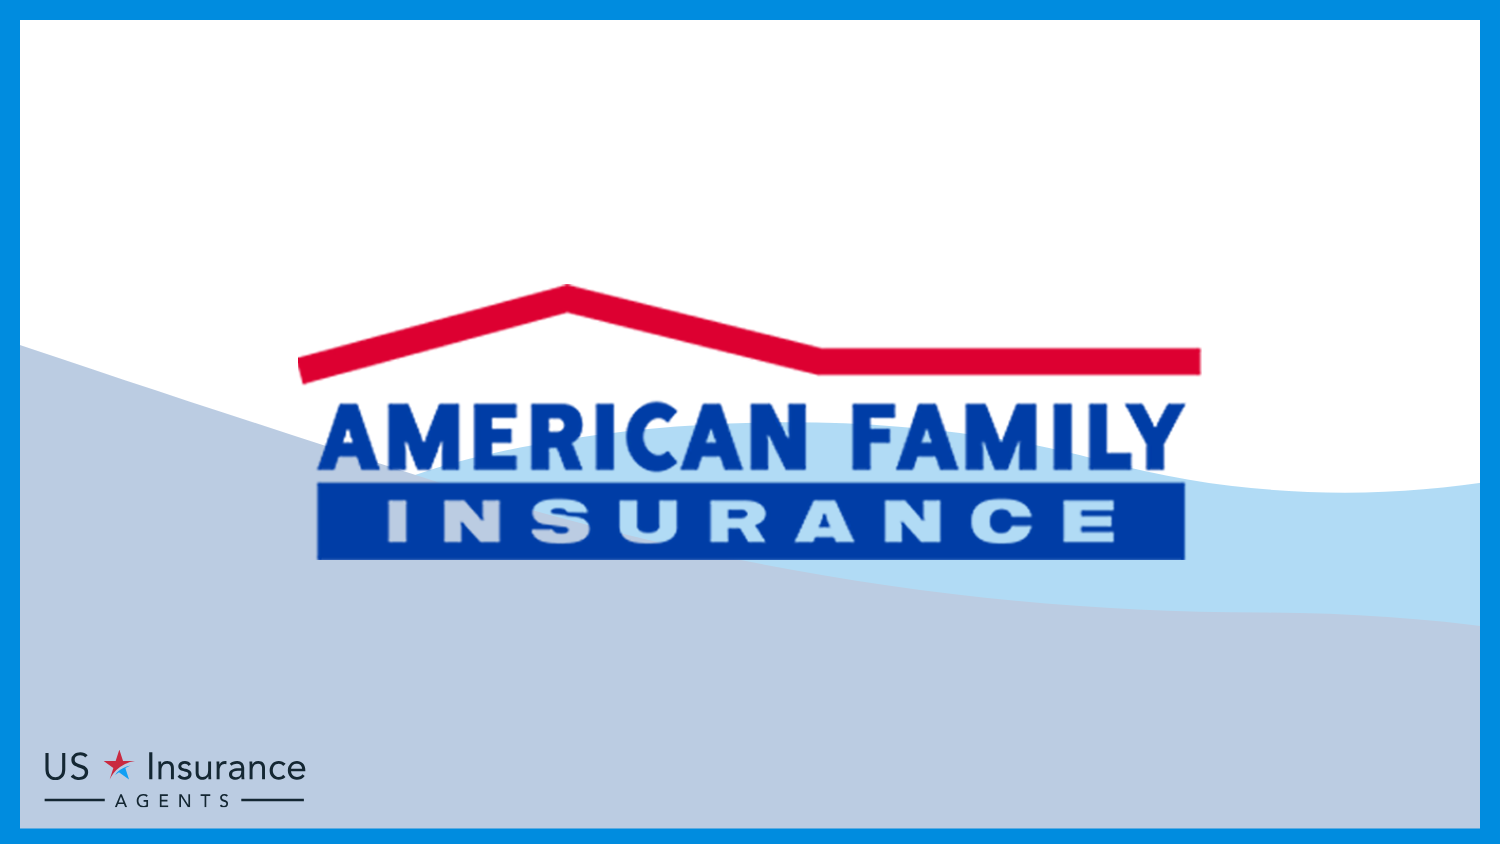 American Family: Best Business Insurance for Schools and Educational Institutions